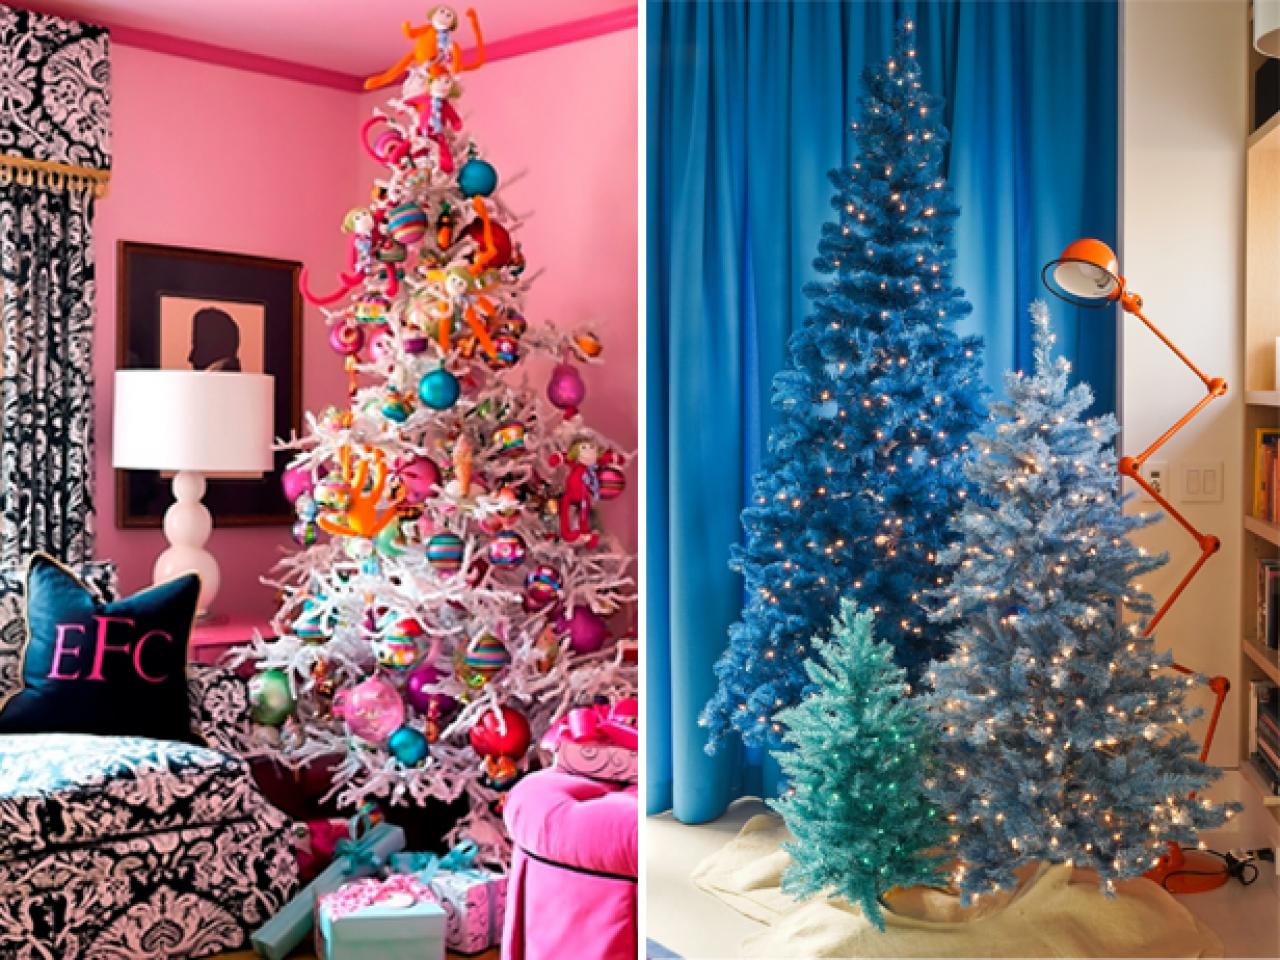 Color Your Christmas With These 10 Artificial Trees | HGTV's Decorating & Design Blog | HGTV